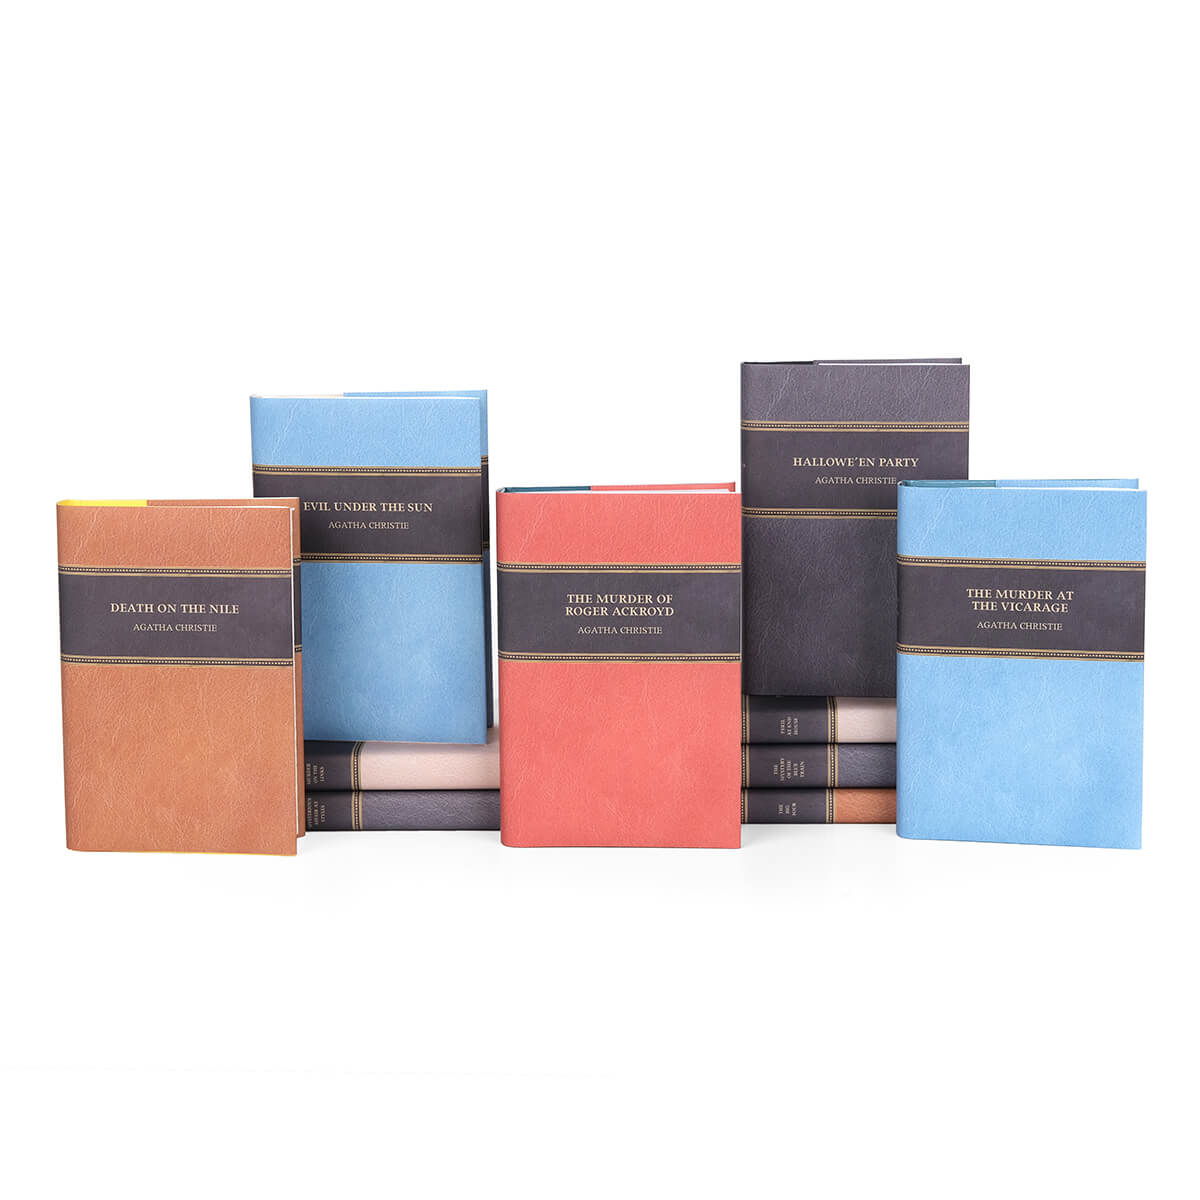 Agatha Christie books wrapped in custom collectible faux leather dust jackets  in black, beige, blue, red, light brown from Juniper Custom. Dust jacket covers feature book title and author name in gold color san serif set against black.